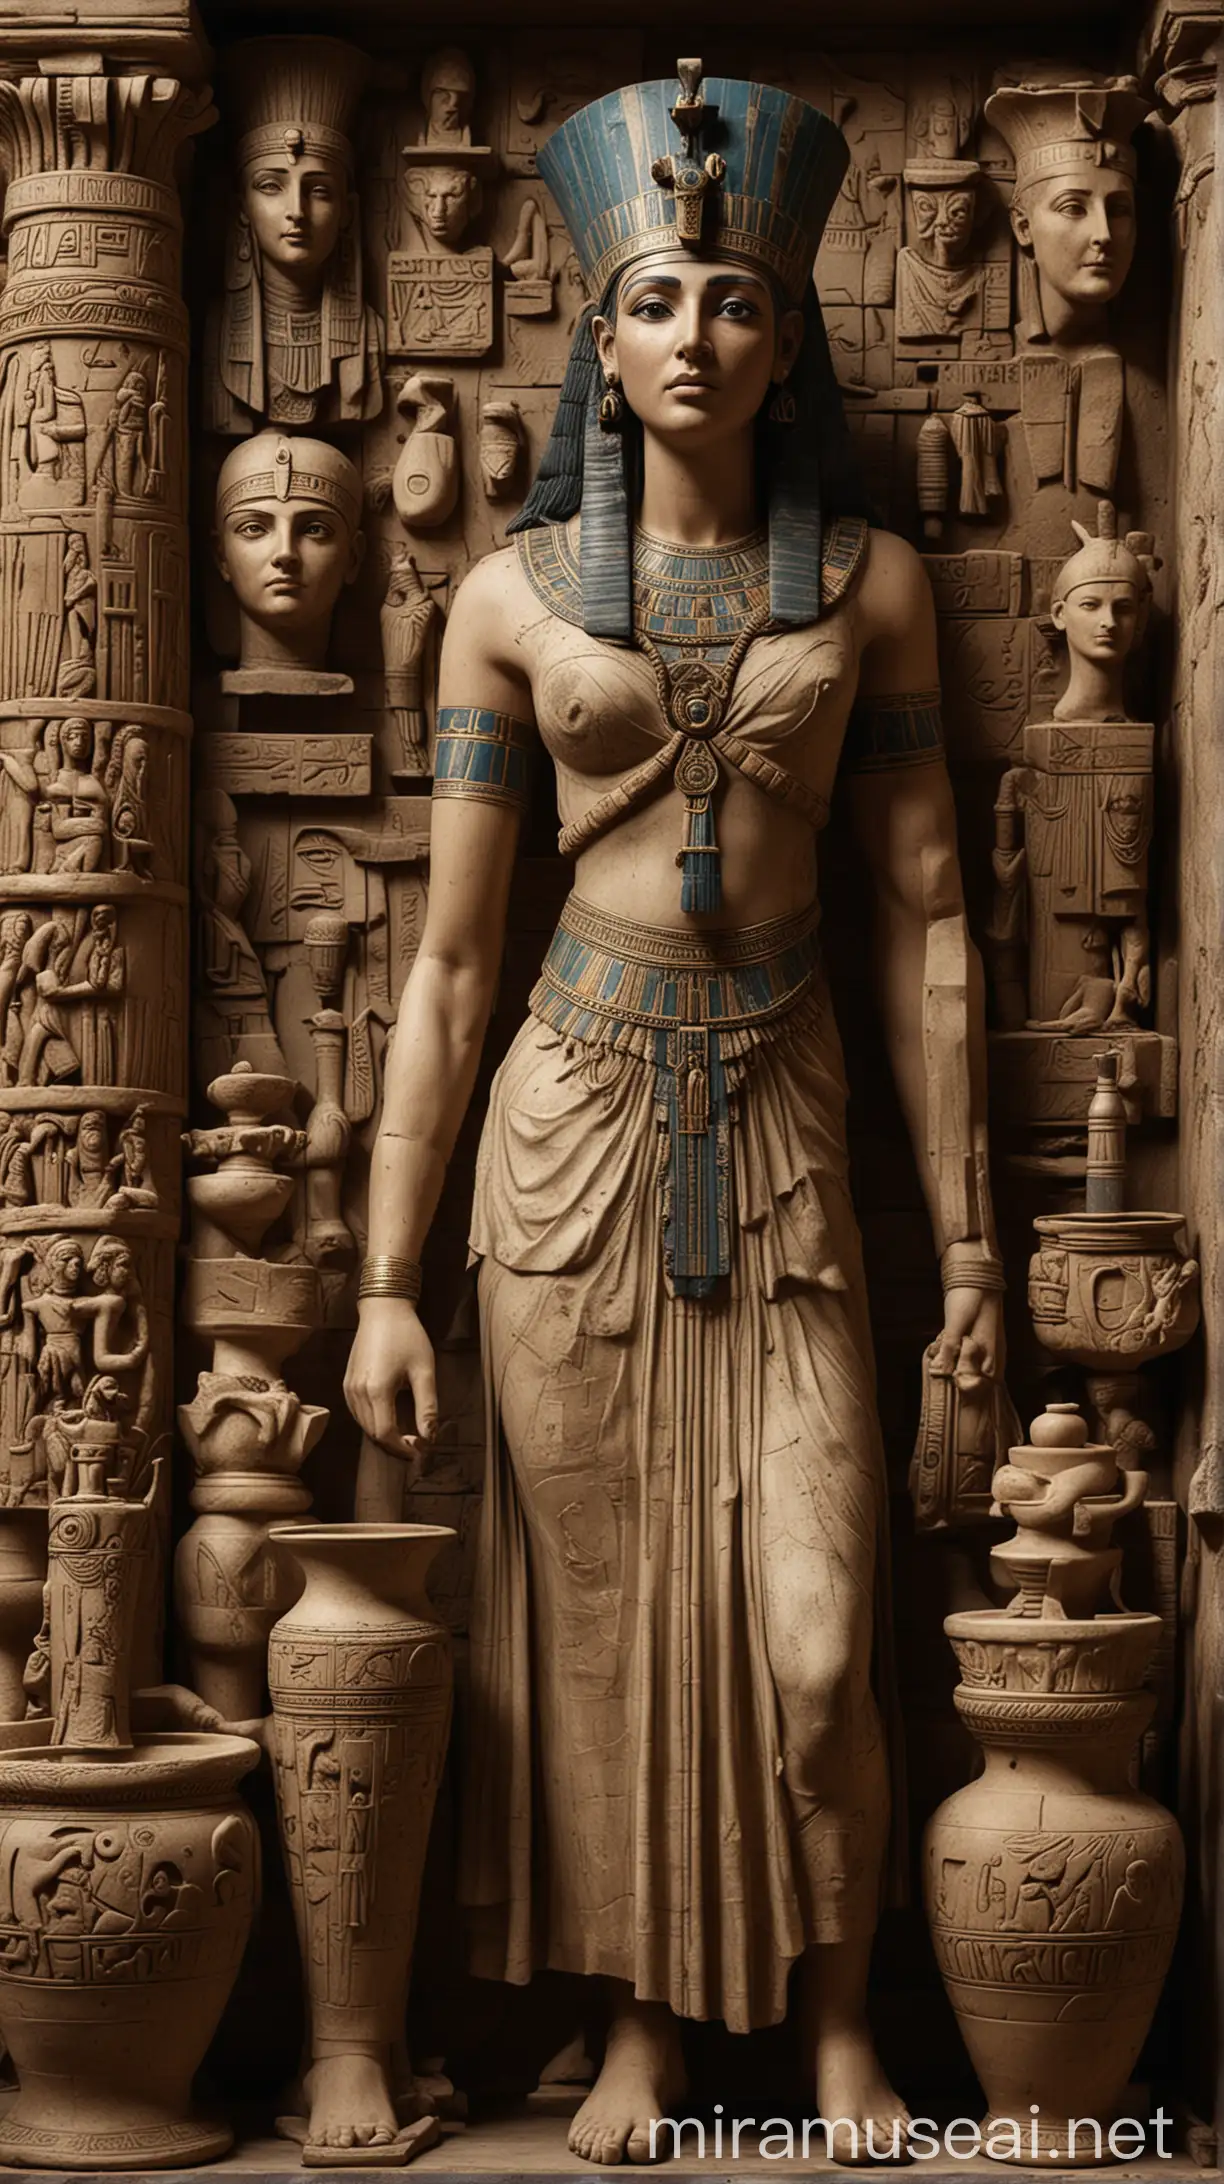 A montage of ancient artifacts, including statues and pottery, depicting scenes from Cleopatra's reign. hyper realistic